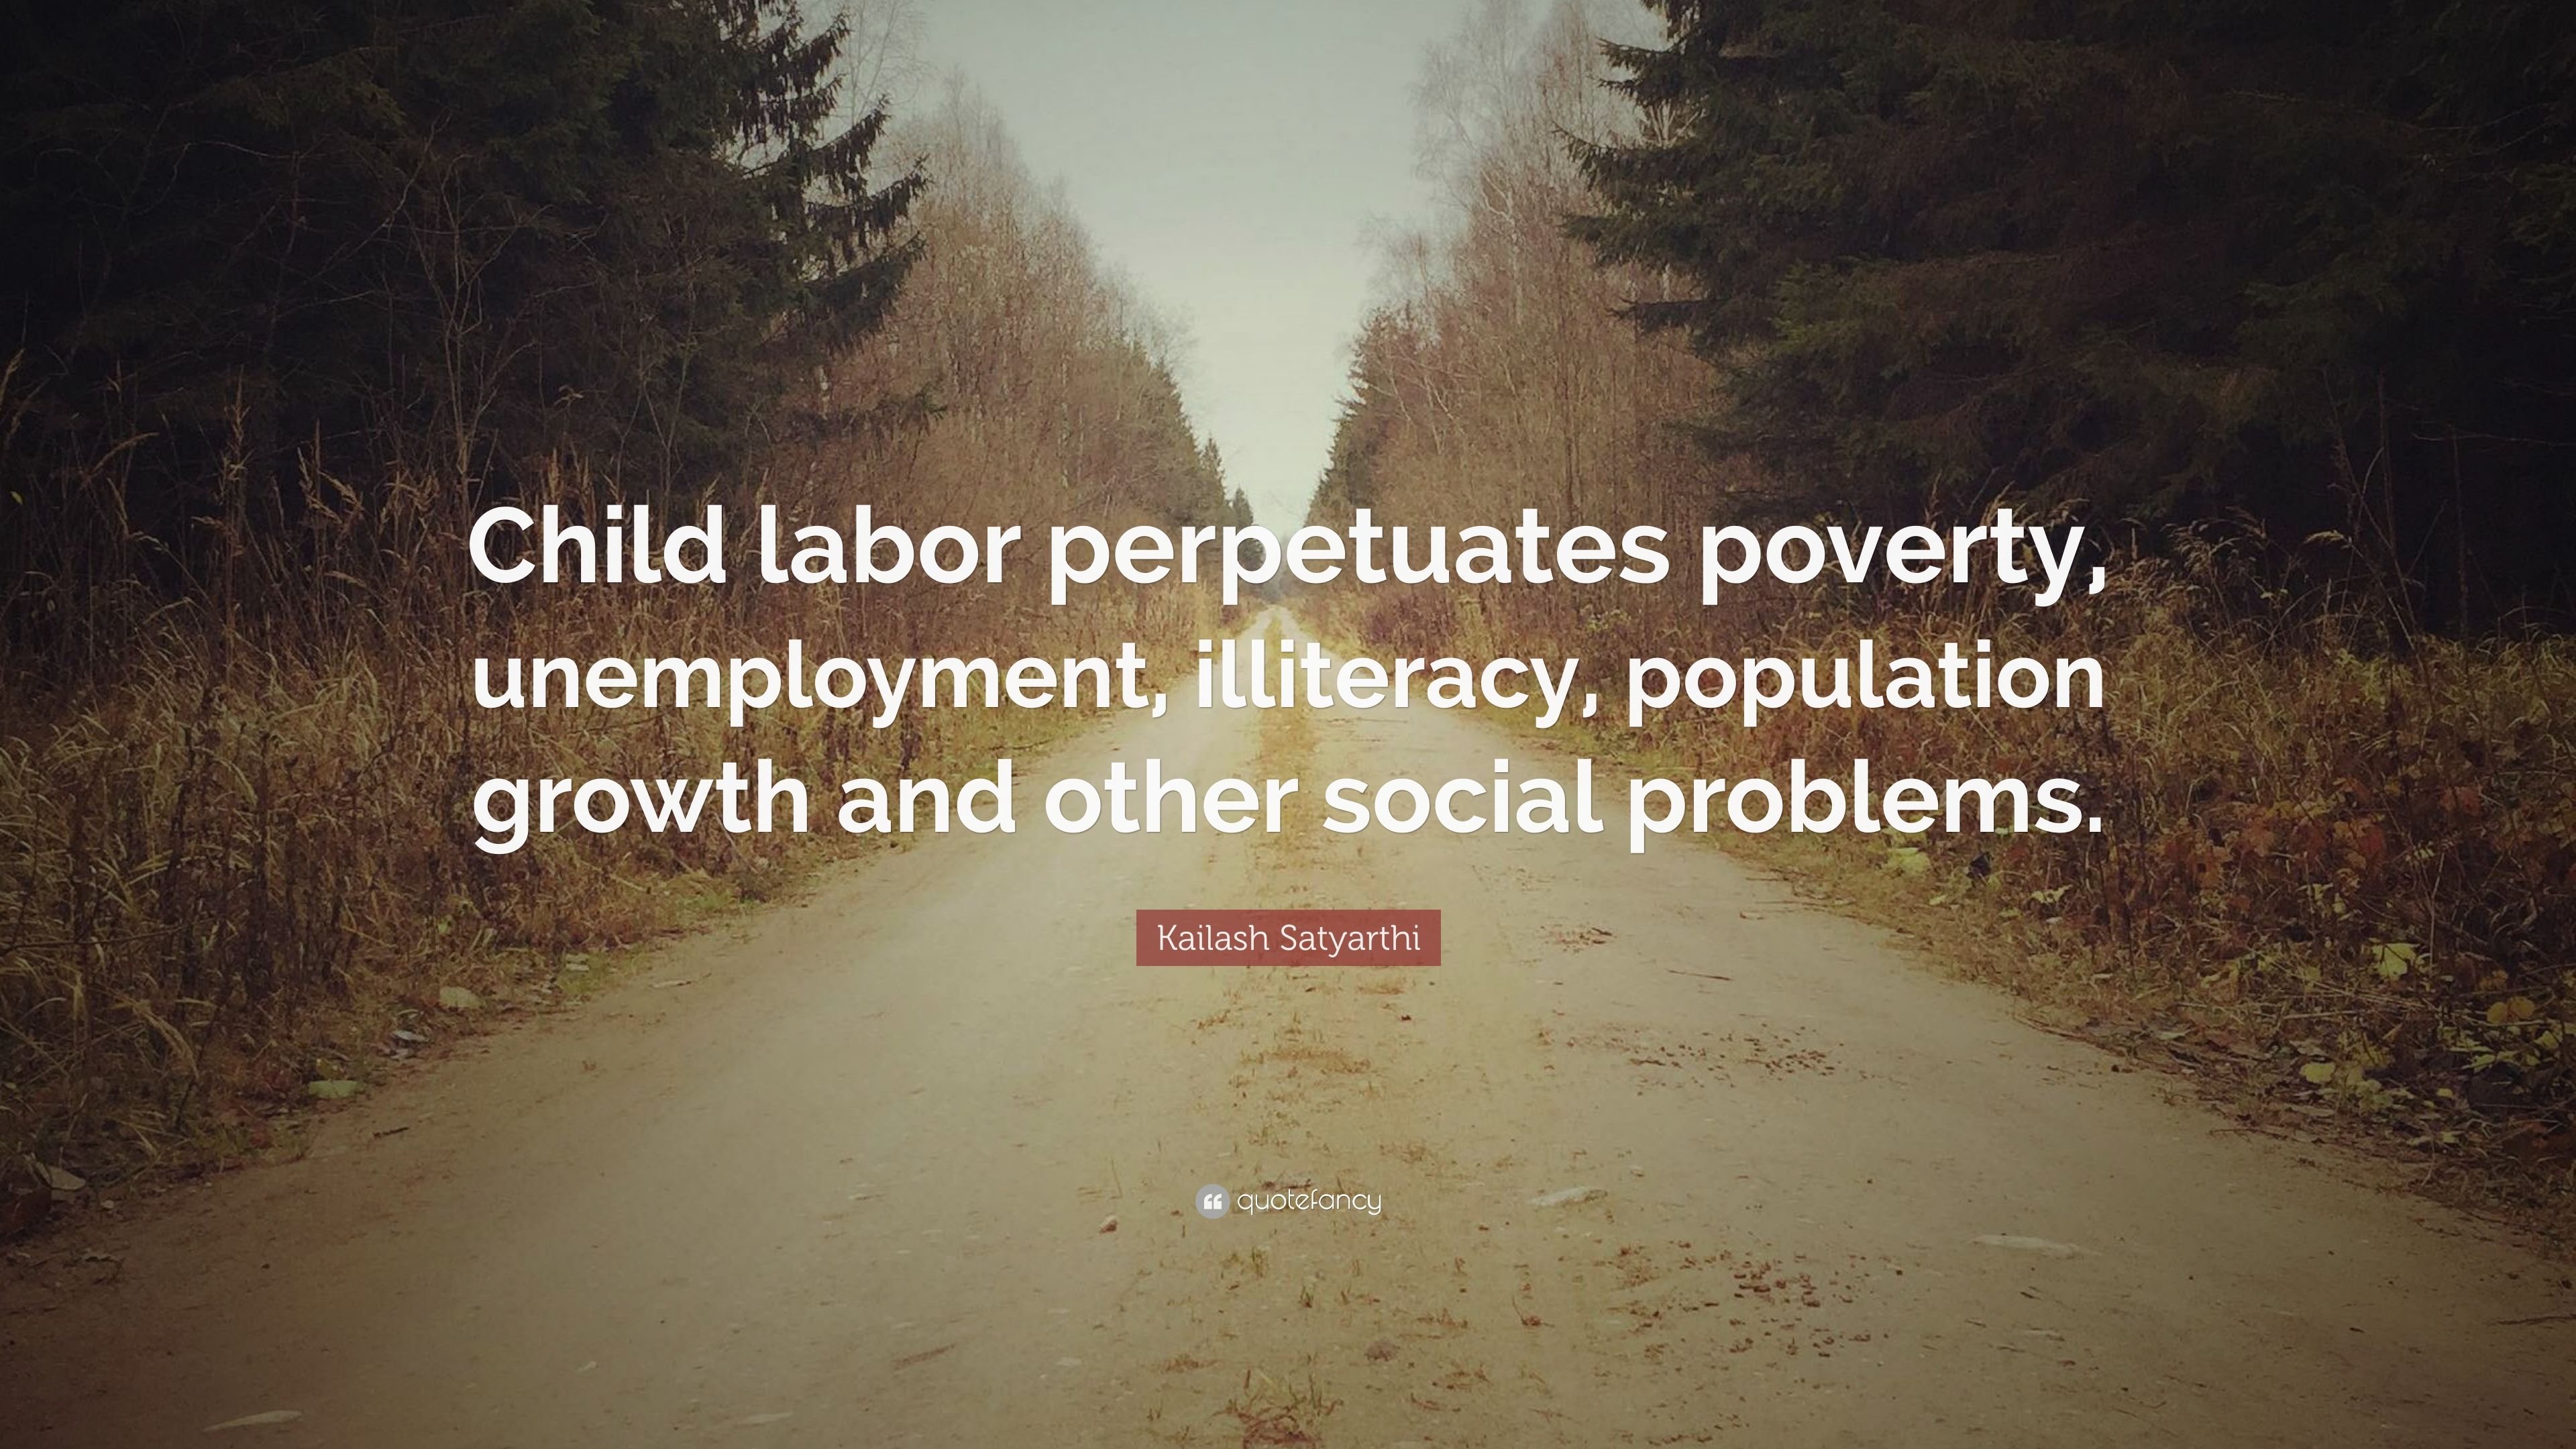 Kailash Satyarthi Quote: “Child labor perpetuates poverty, unemployment, illiteracy, population growth and other social problems.” (9 wallpaper)